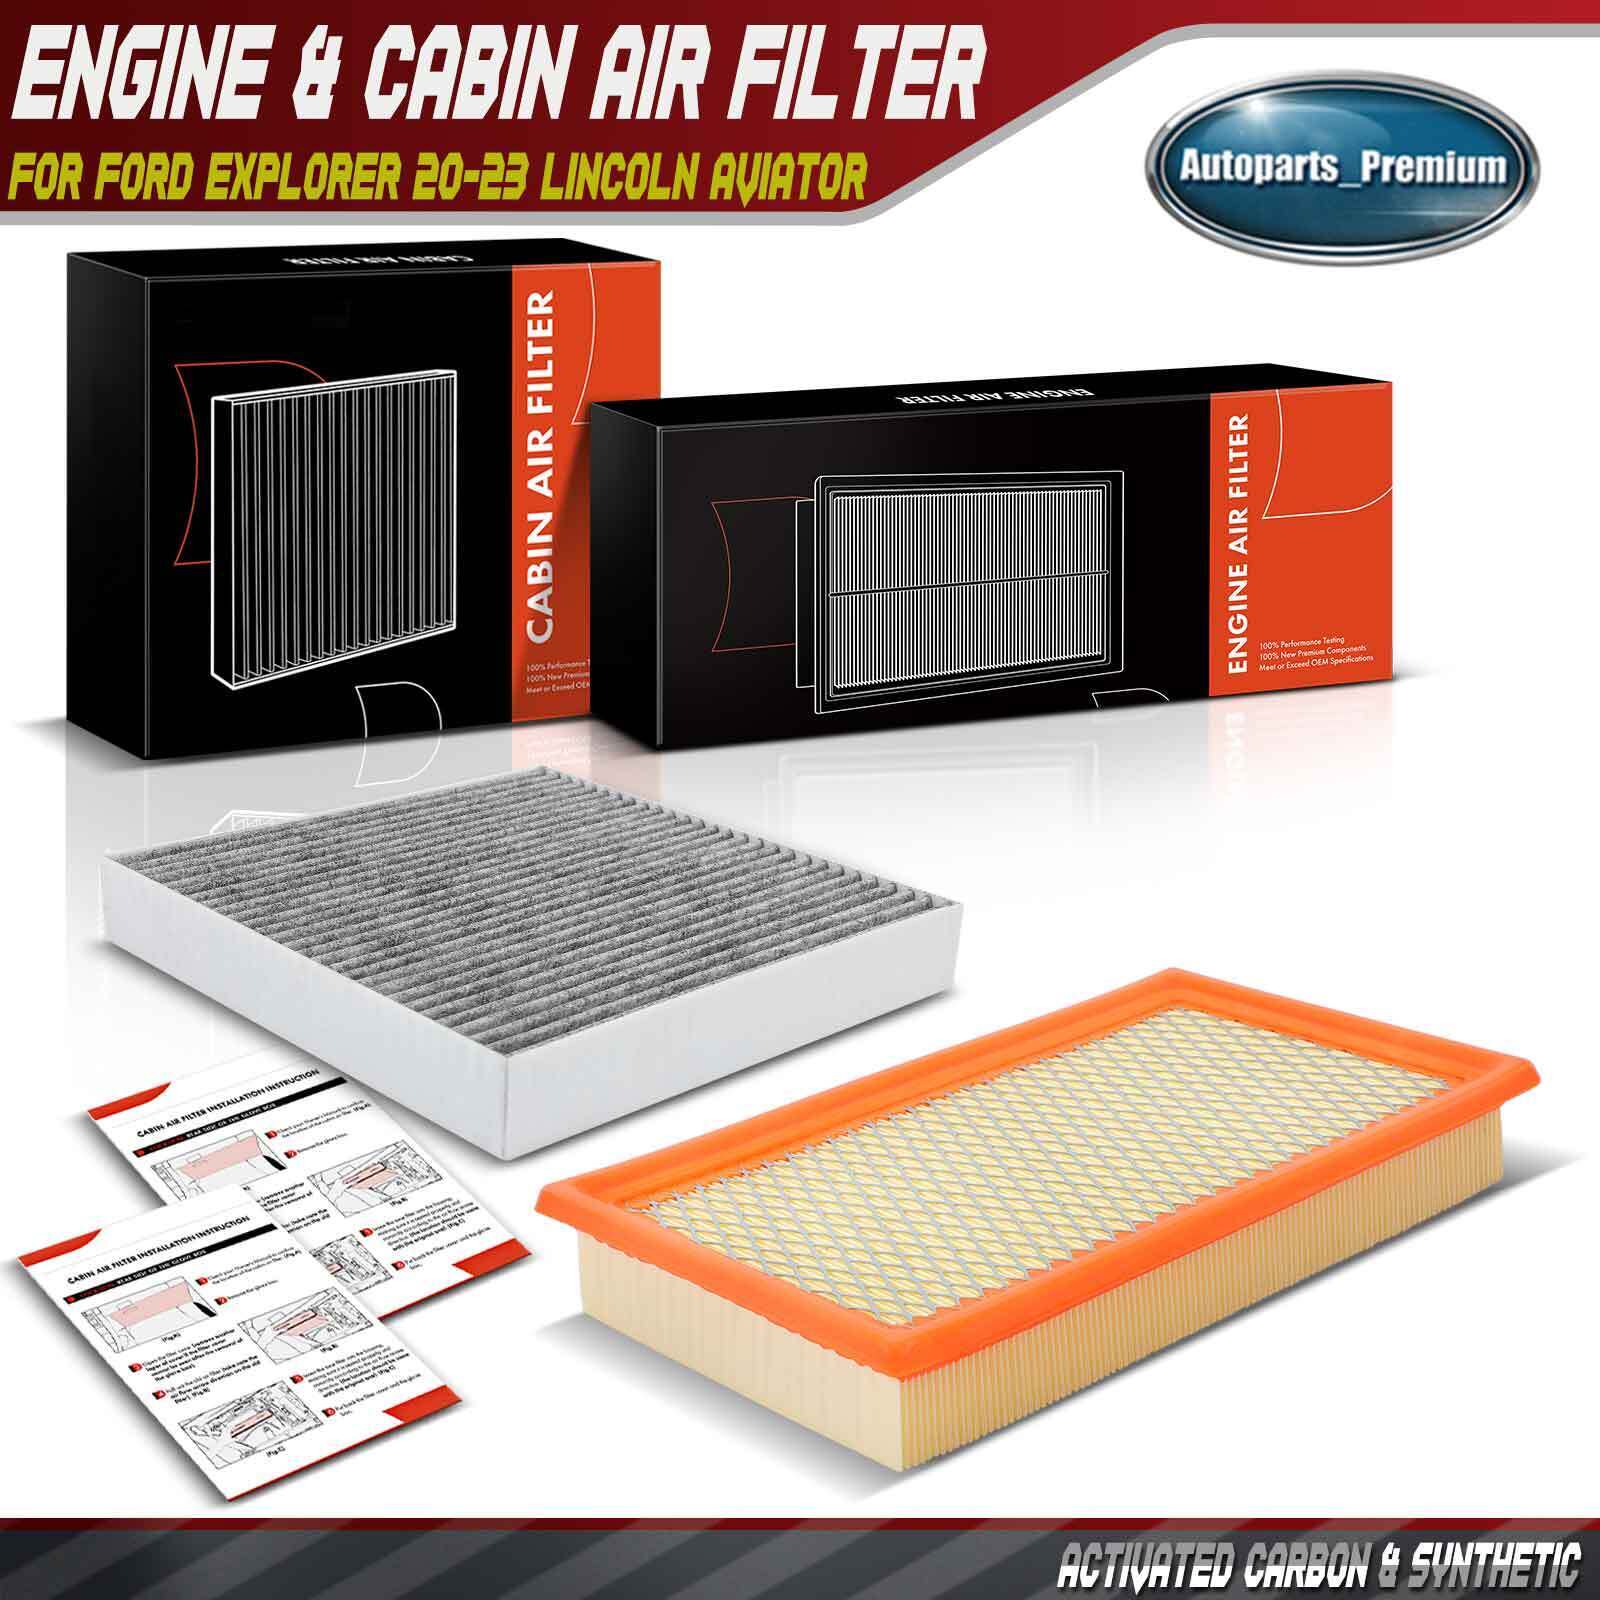 Engine & Cabin Air Filter for Ford Explorer 20-23 Lincoln Aviator 2.3L 3.0L